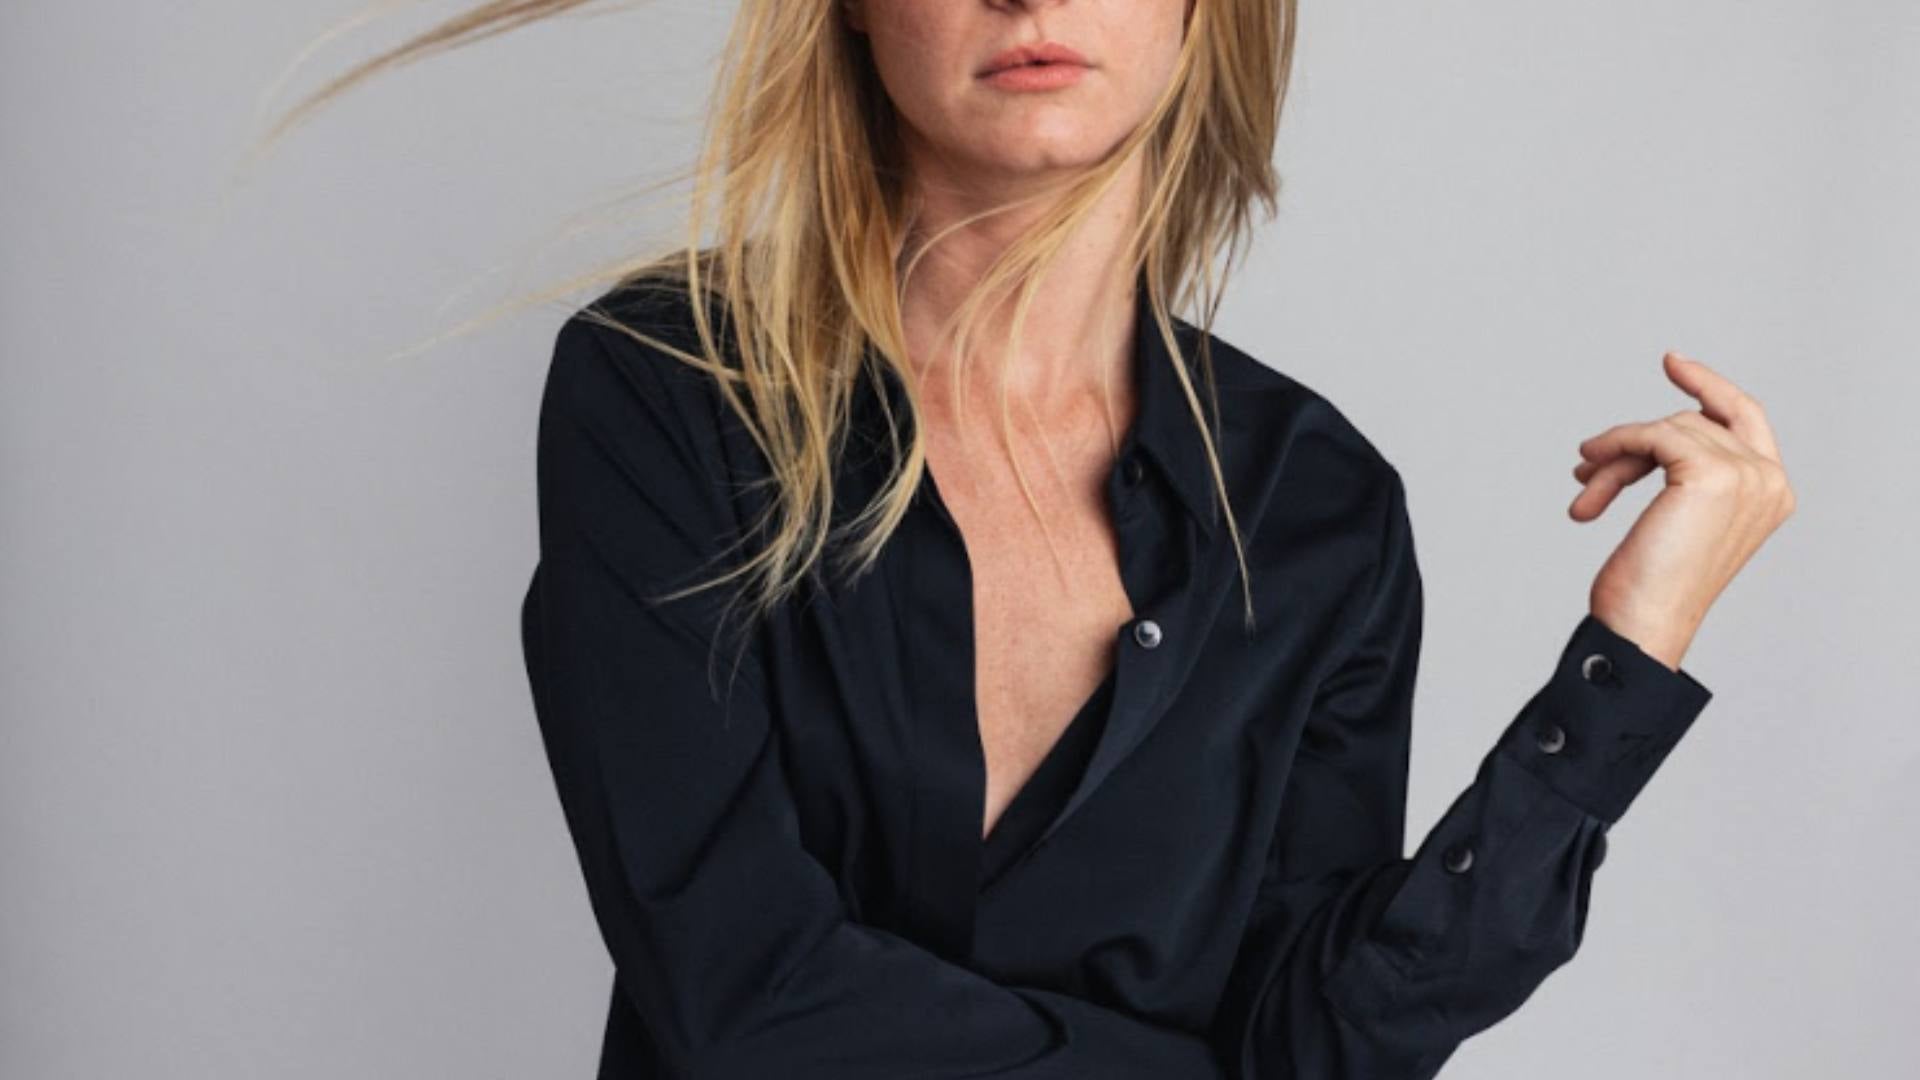 A person wears a sustainable black top.